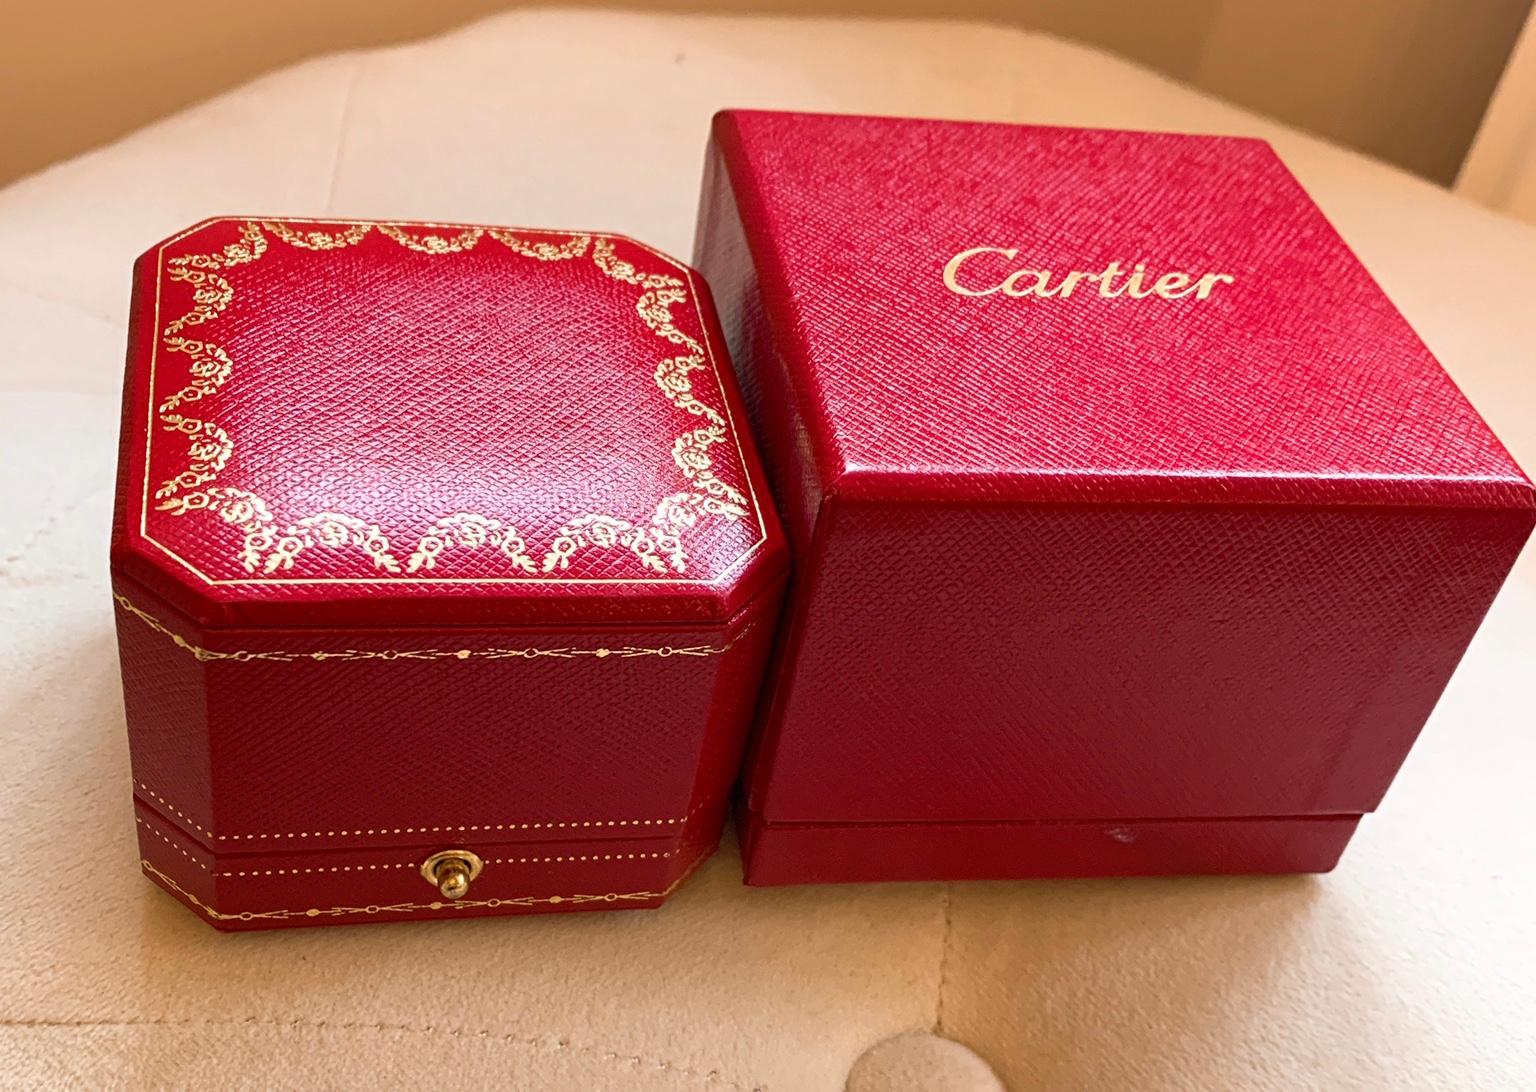 cartier ring box and bag